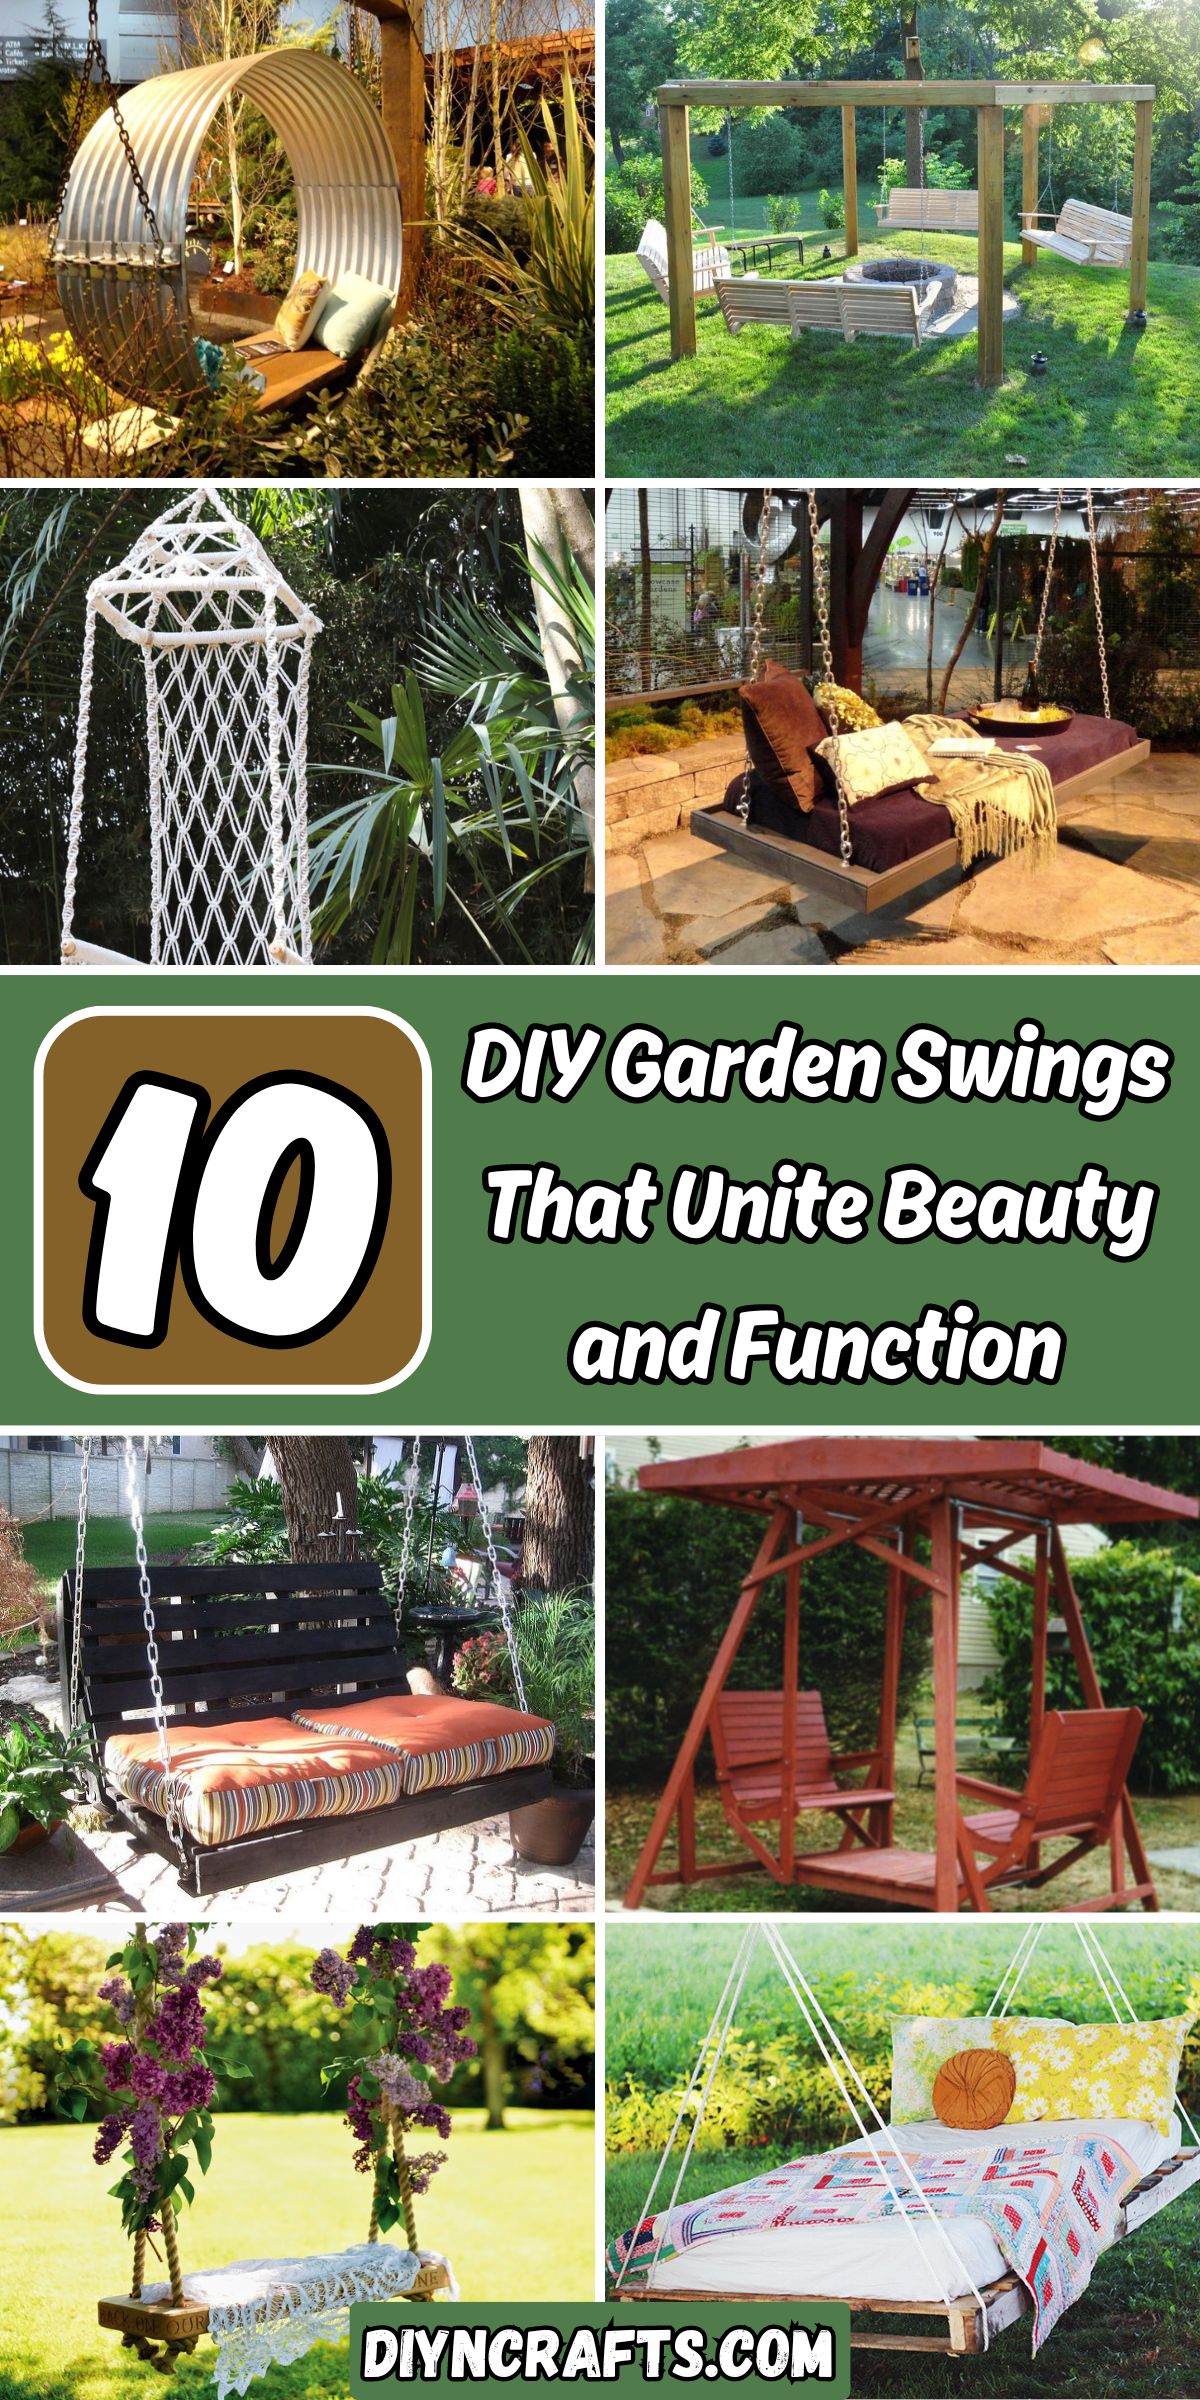 10 DIY Garden Swings That Unite Beauty and Function collage.